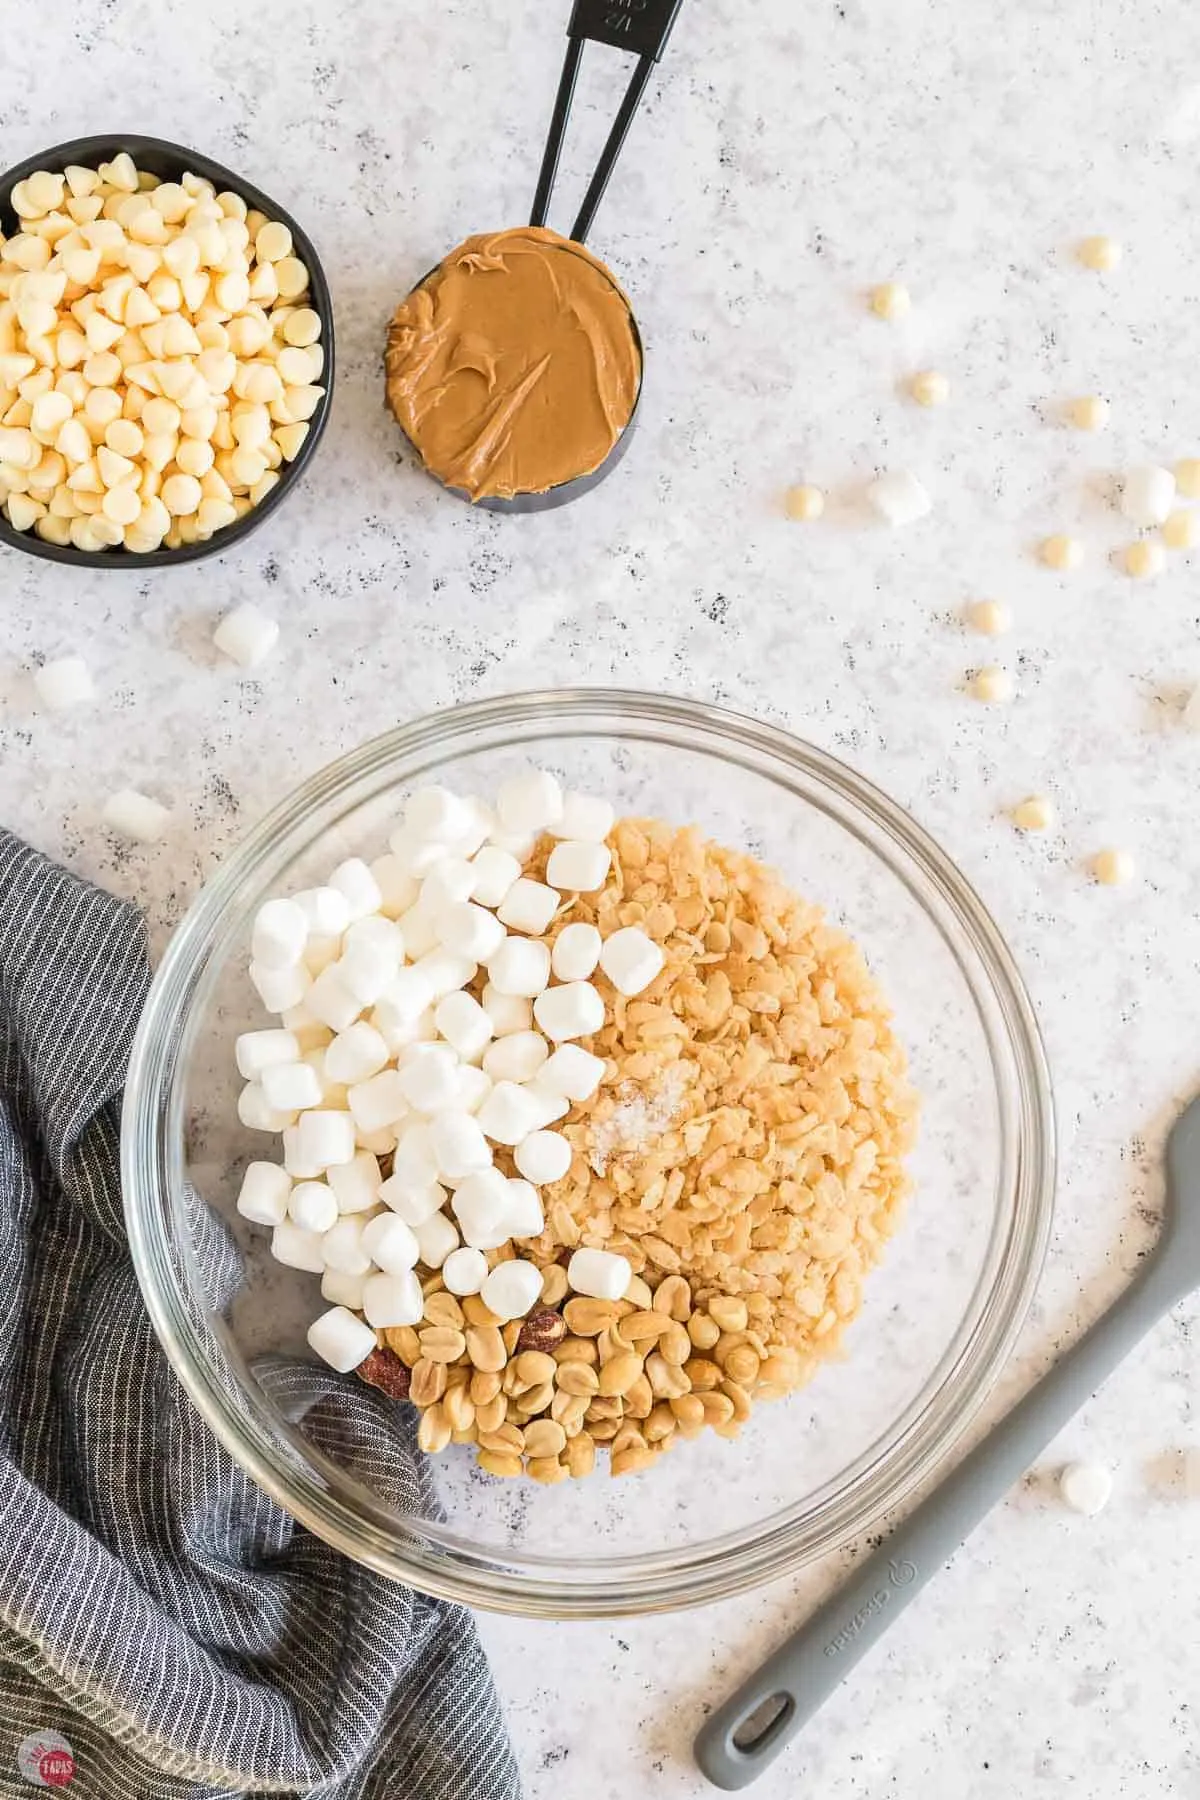 marshmallows, cereal, and peanuts in a bowl